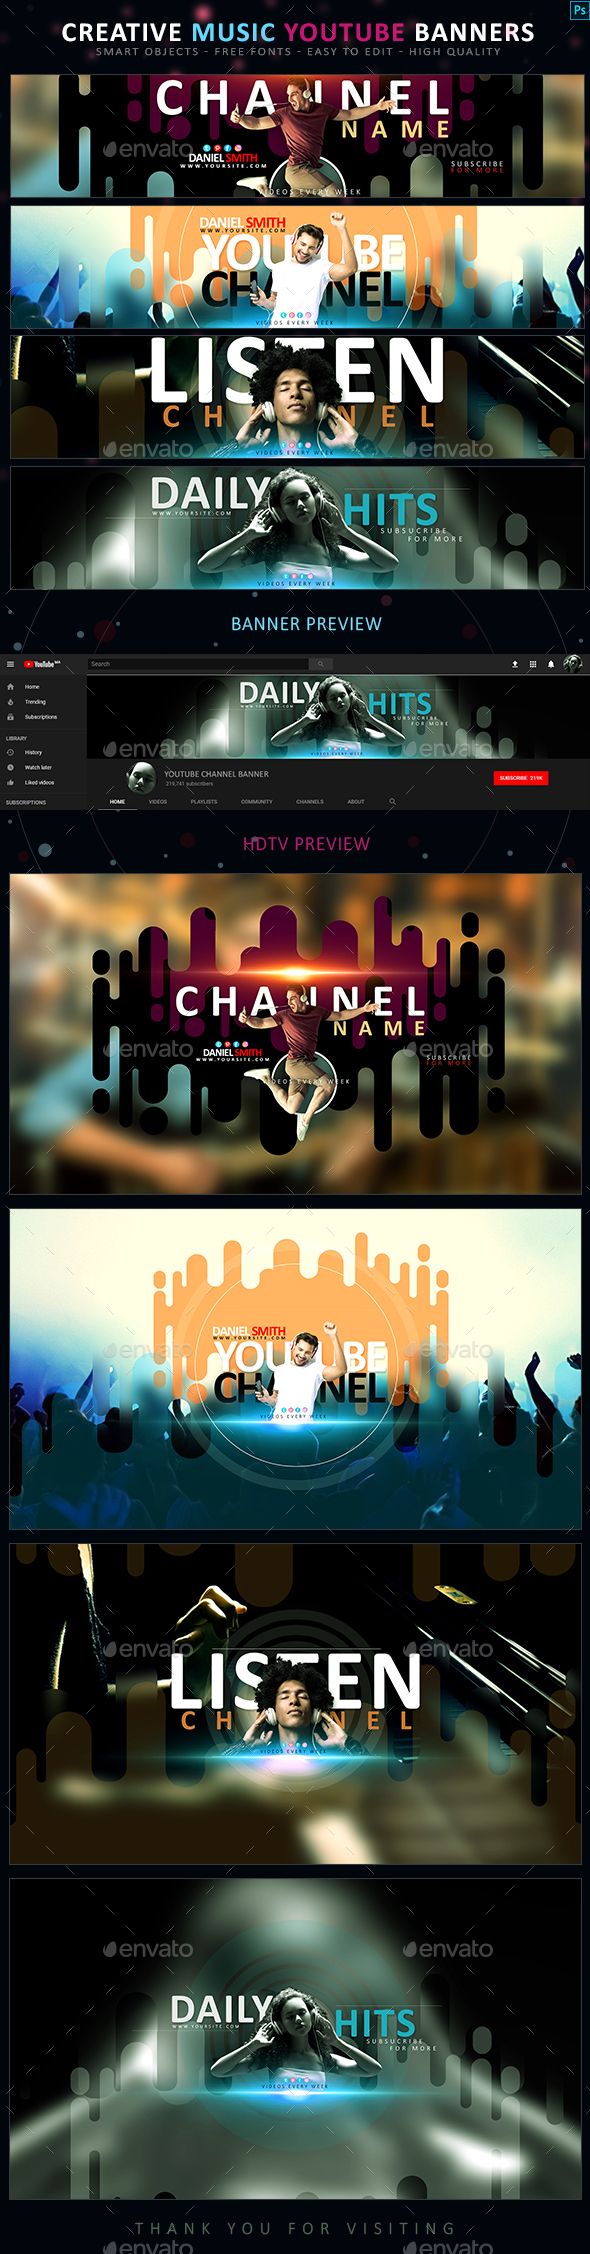 Music Banner Graphics Designs Templates From Graphicriver